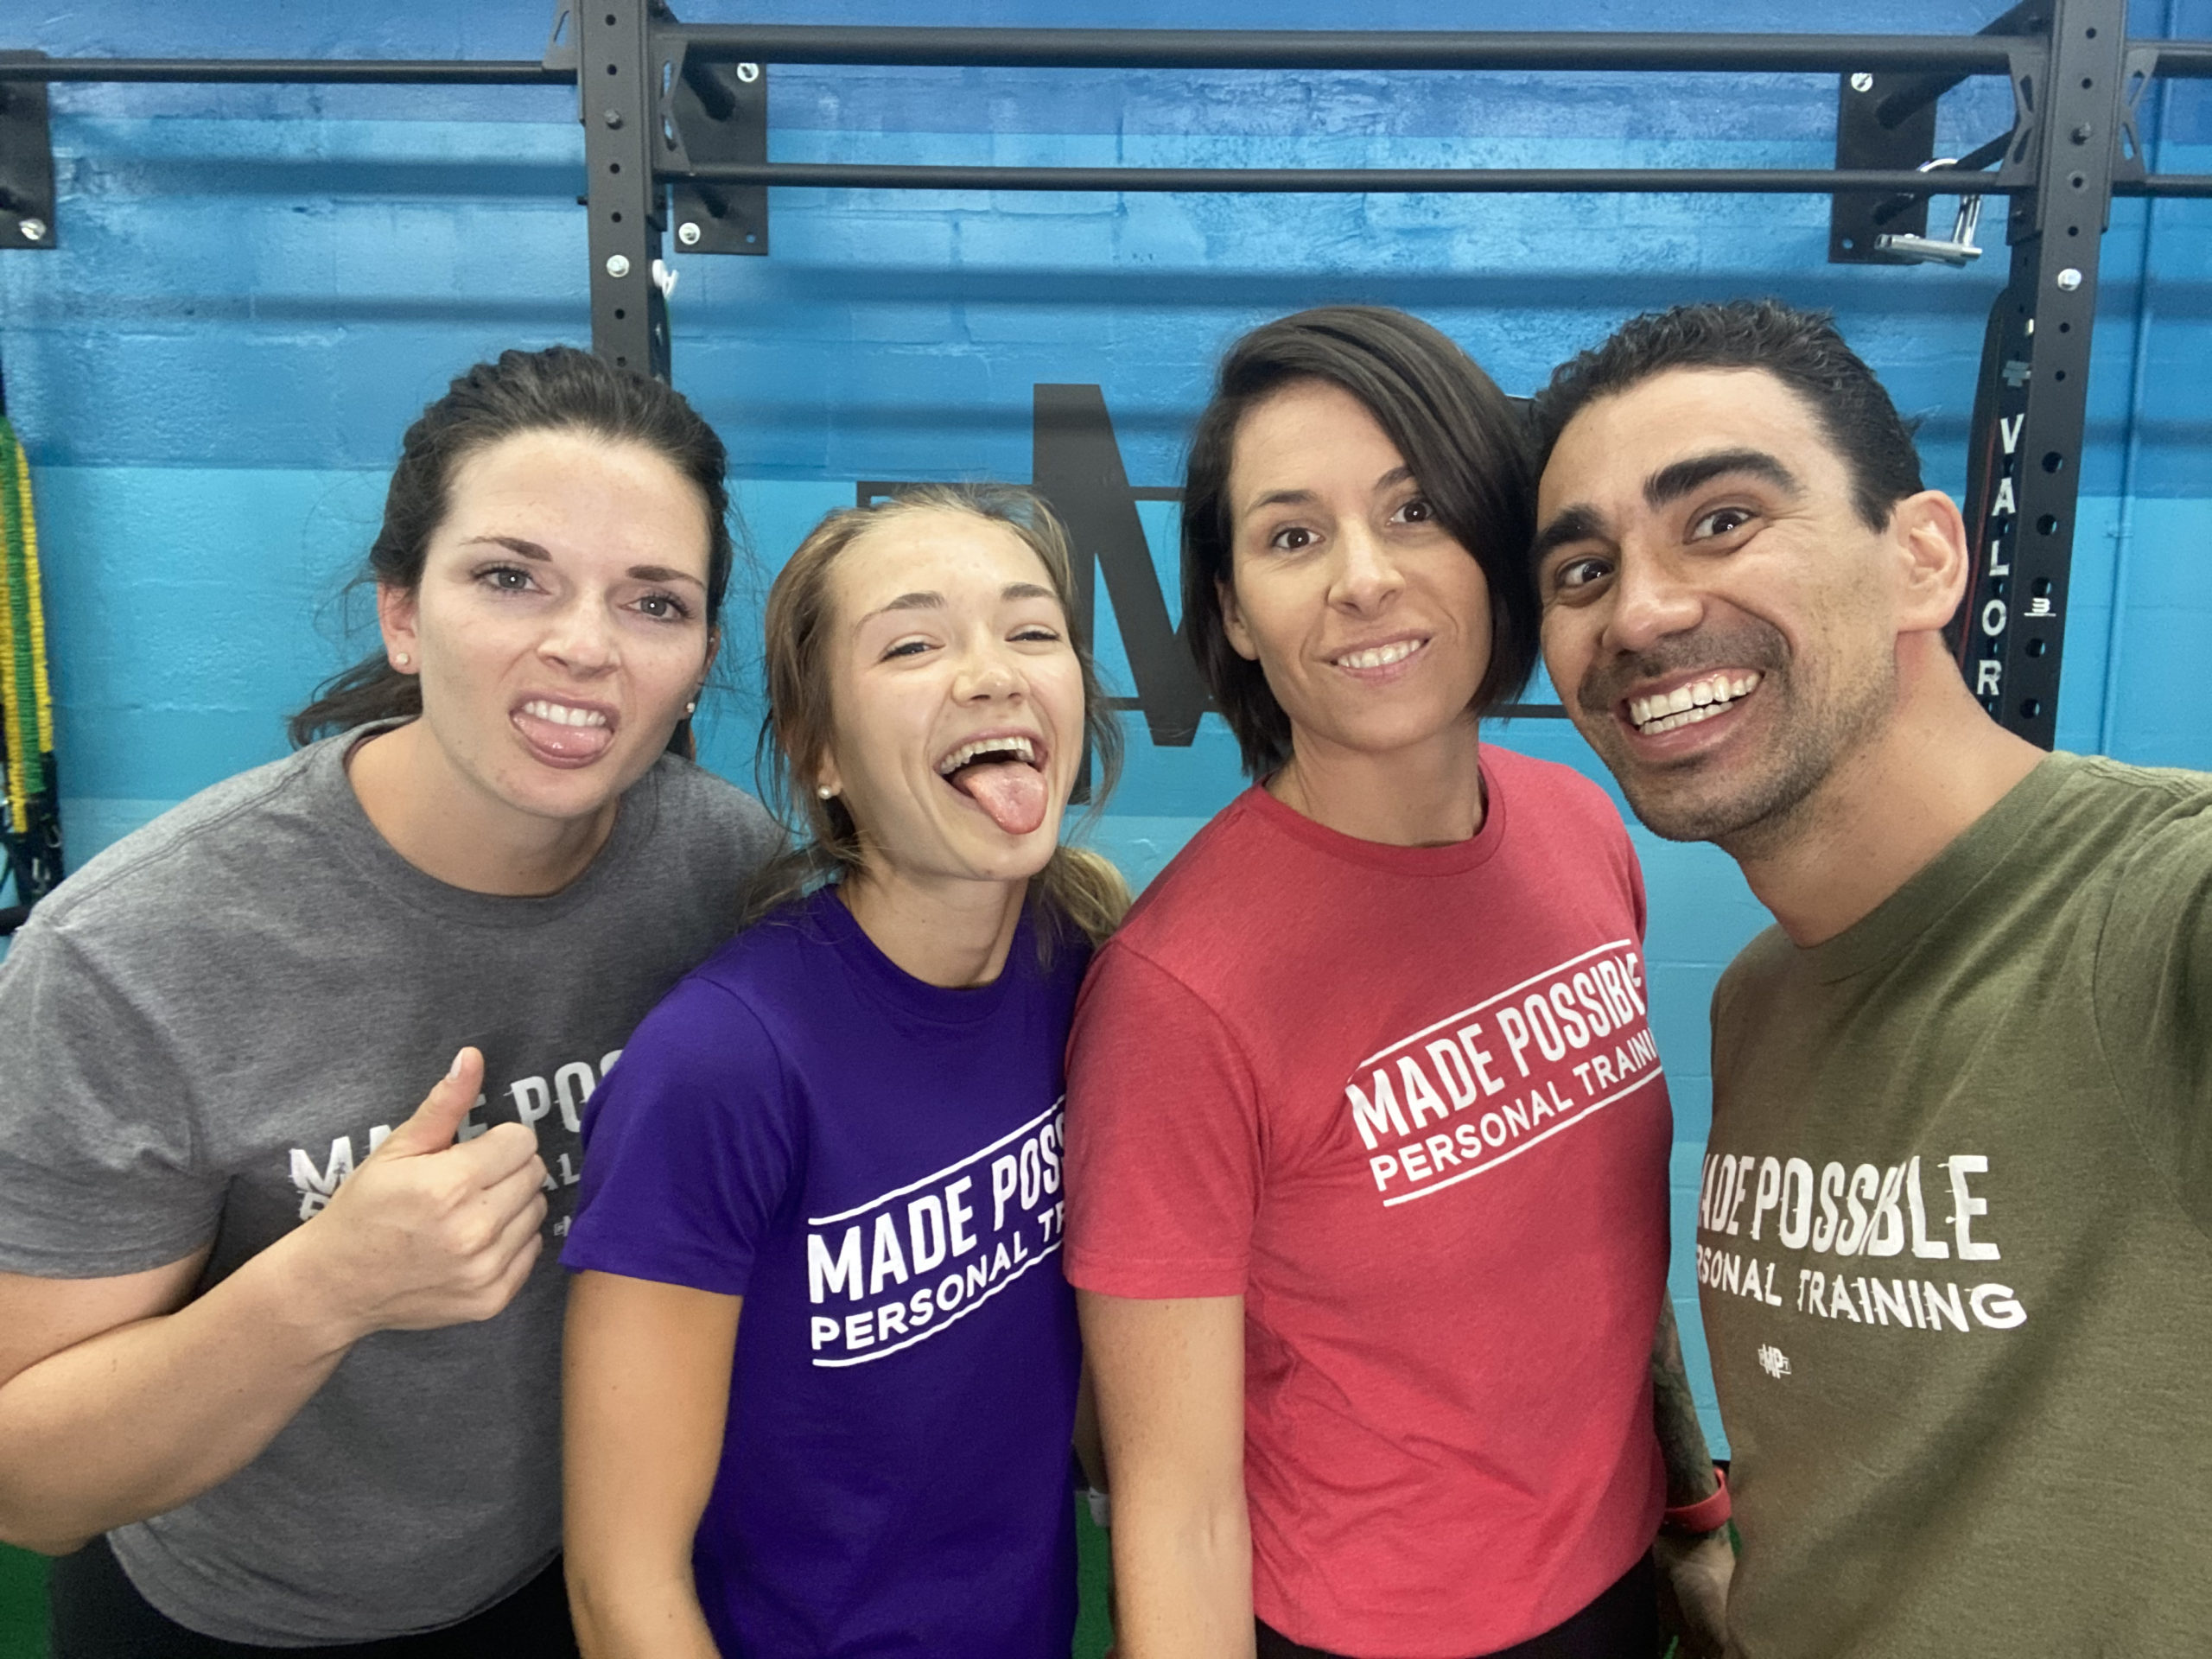 Made Possible Personal Training Team in St. Petersburg, Fl